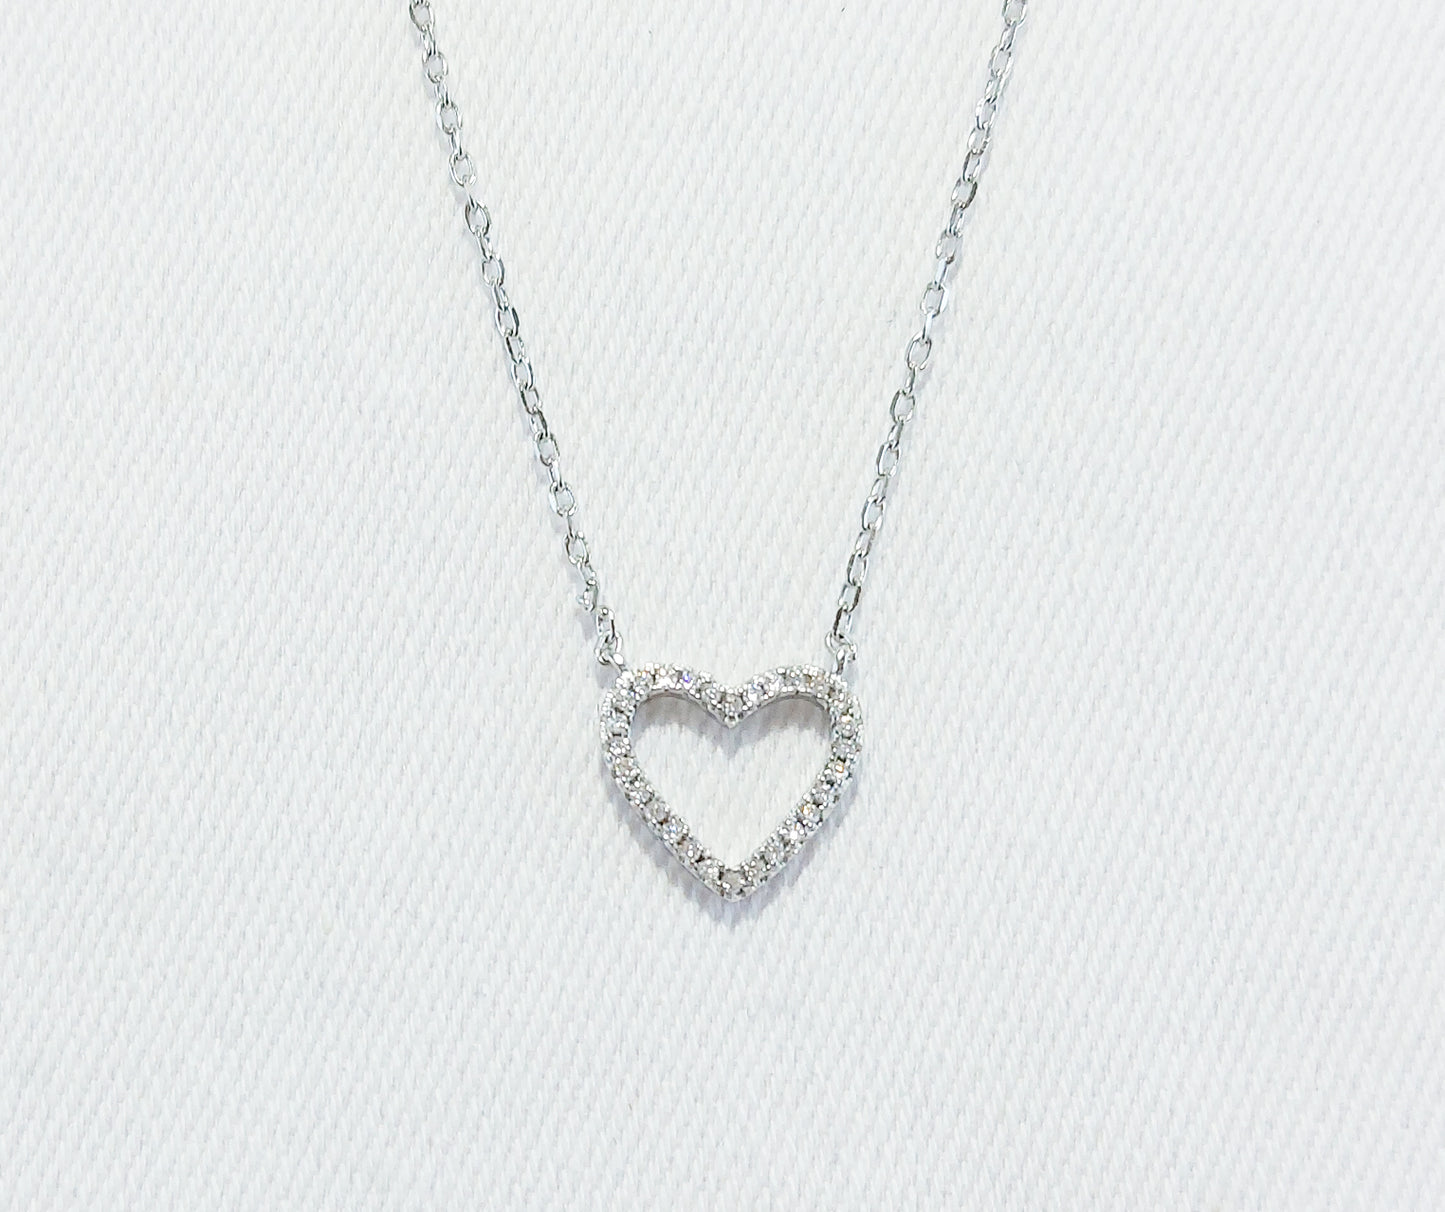 Sterling Silver Heart Necklace with Cubic Zirconia Stones